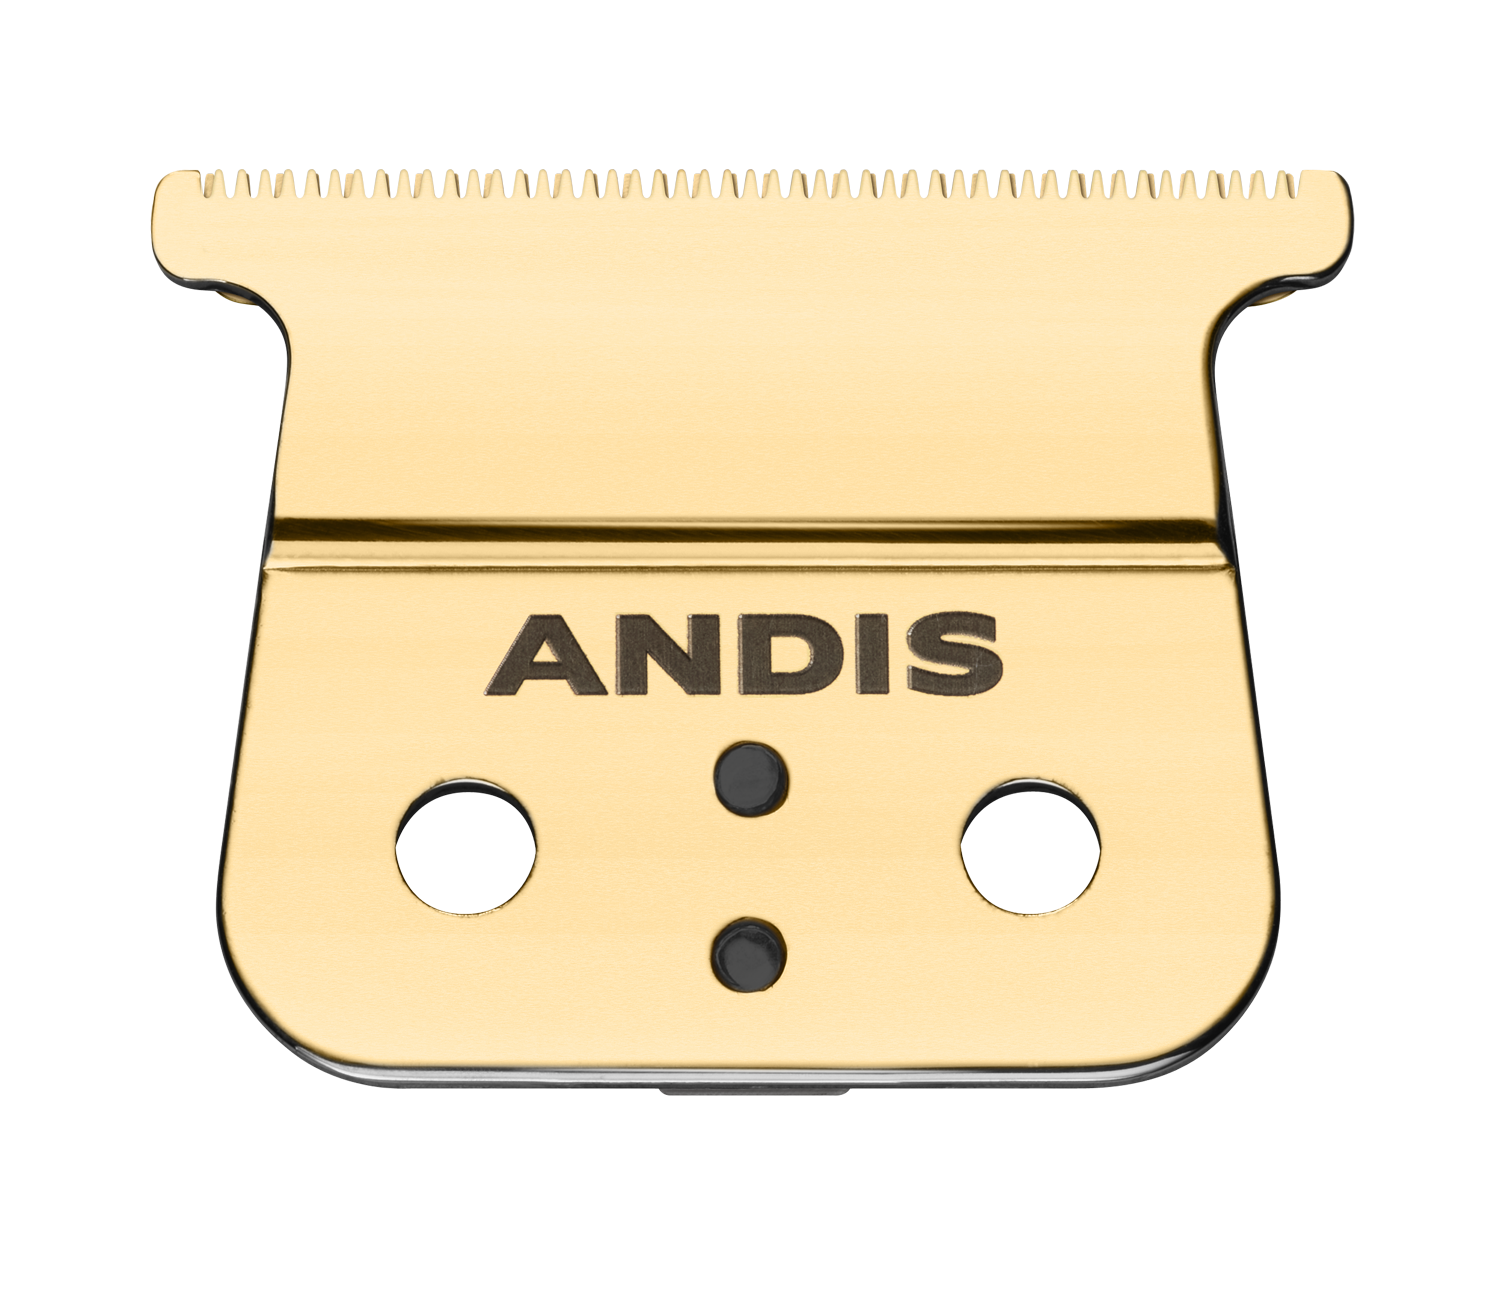 Andis GTX-EXO Cordless Gold Shallow Tooth Replacement Blade (AN74115)